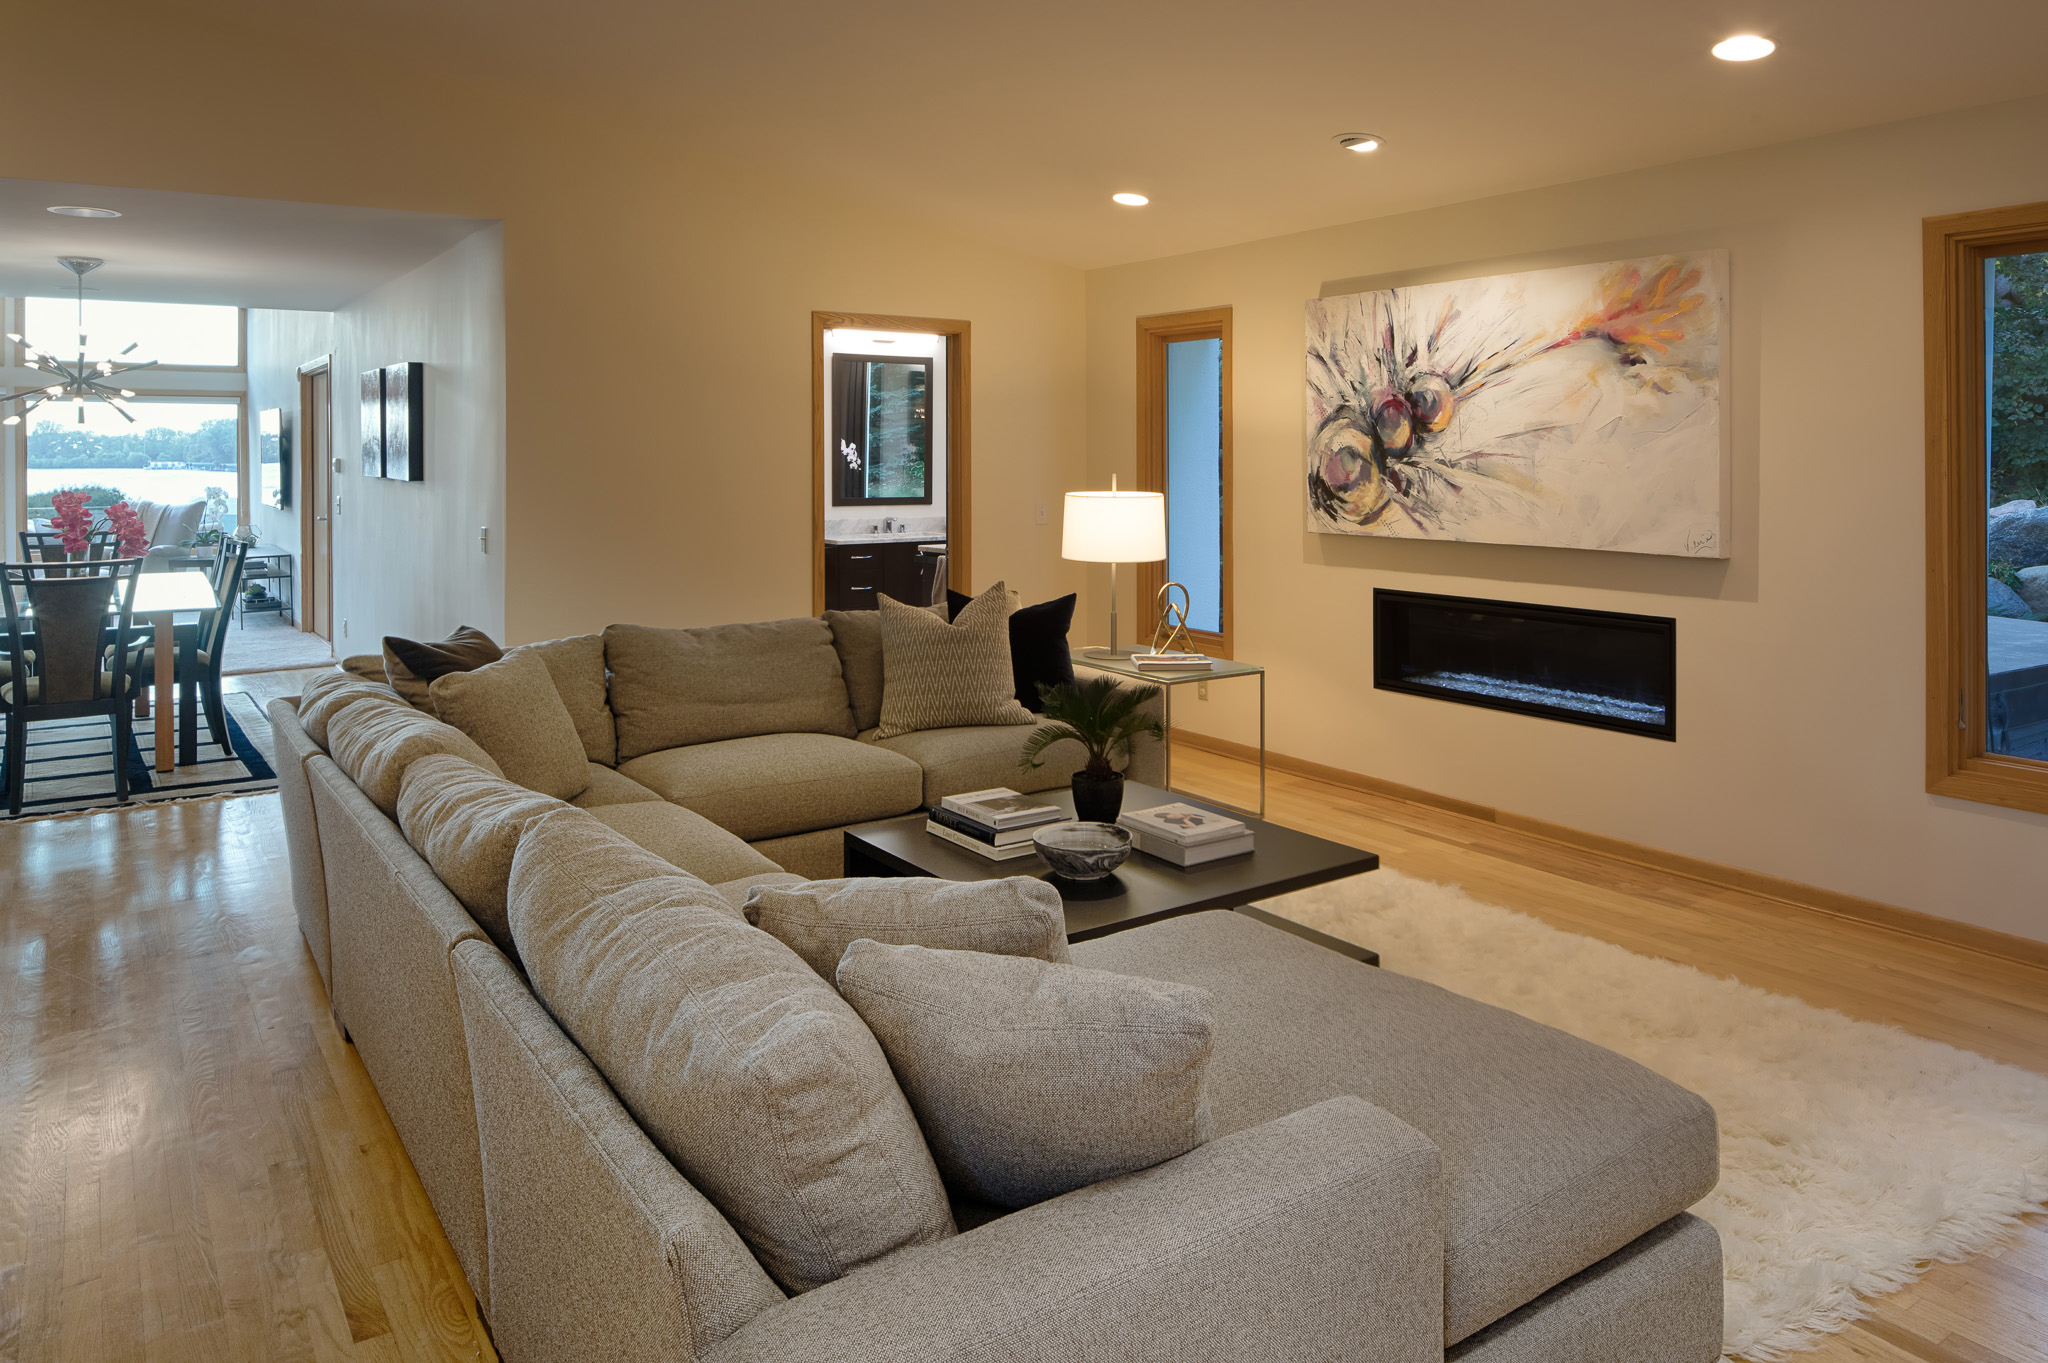 Contemporary Home Remodel - Sitting Area - Fireplace